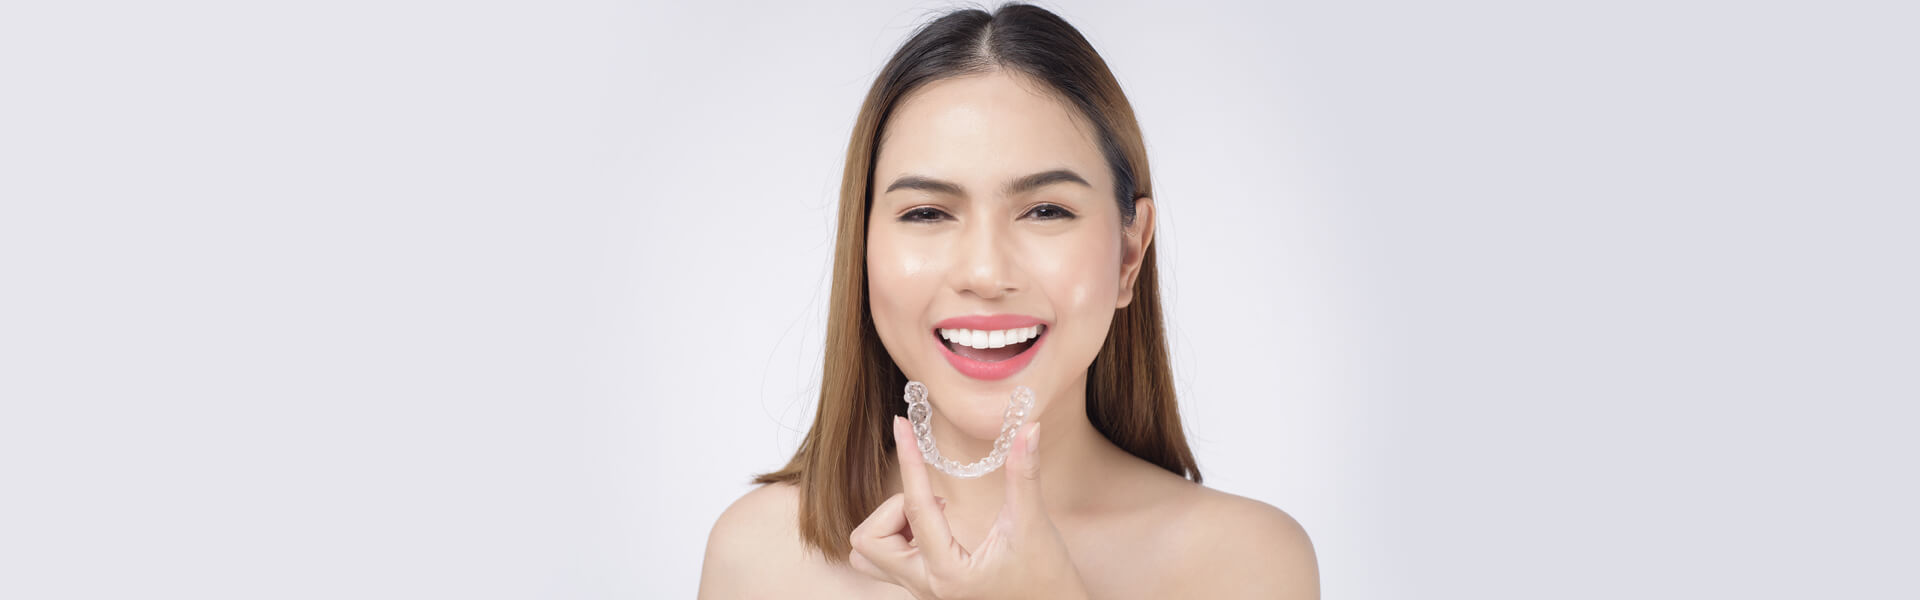 How Do You Know If You Need Invisalign?